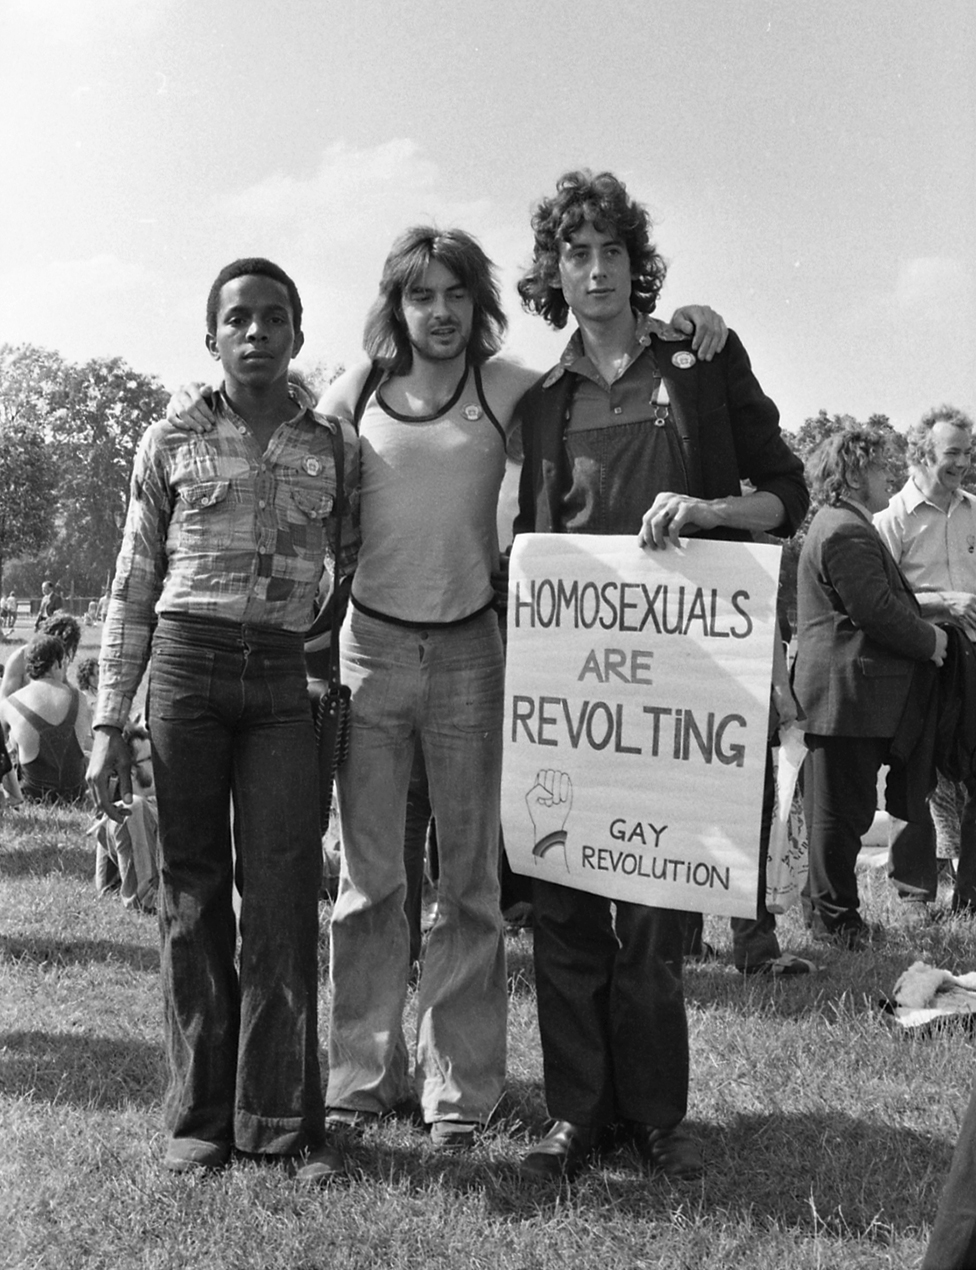 Ted Brown, Noel Glynn and Peter Tatchell at the Pride march in 1973